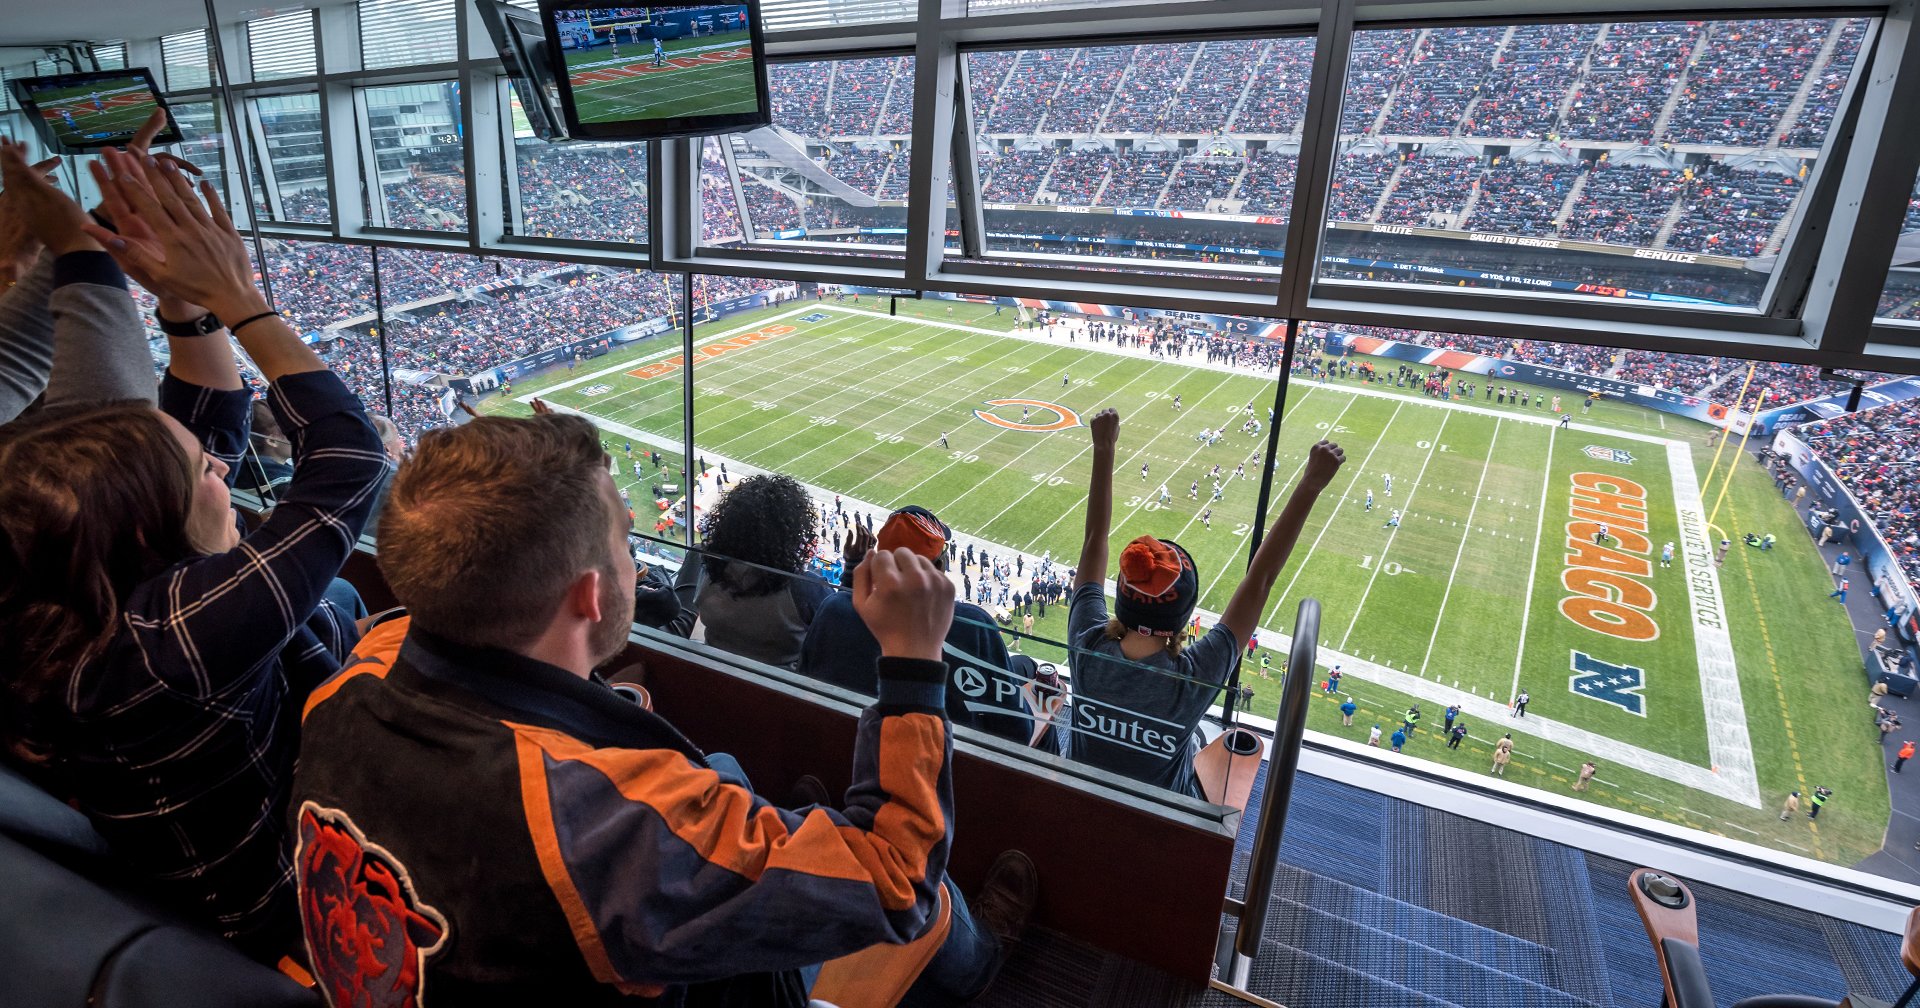 Chicago Bears Seating Chart Prices